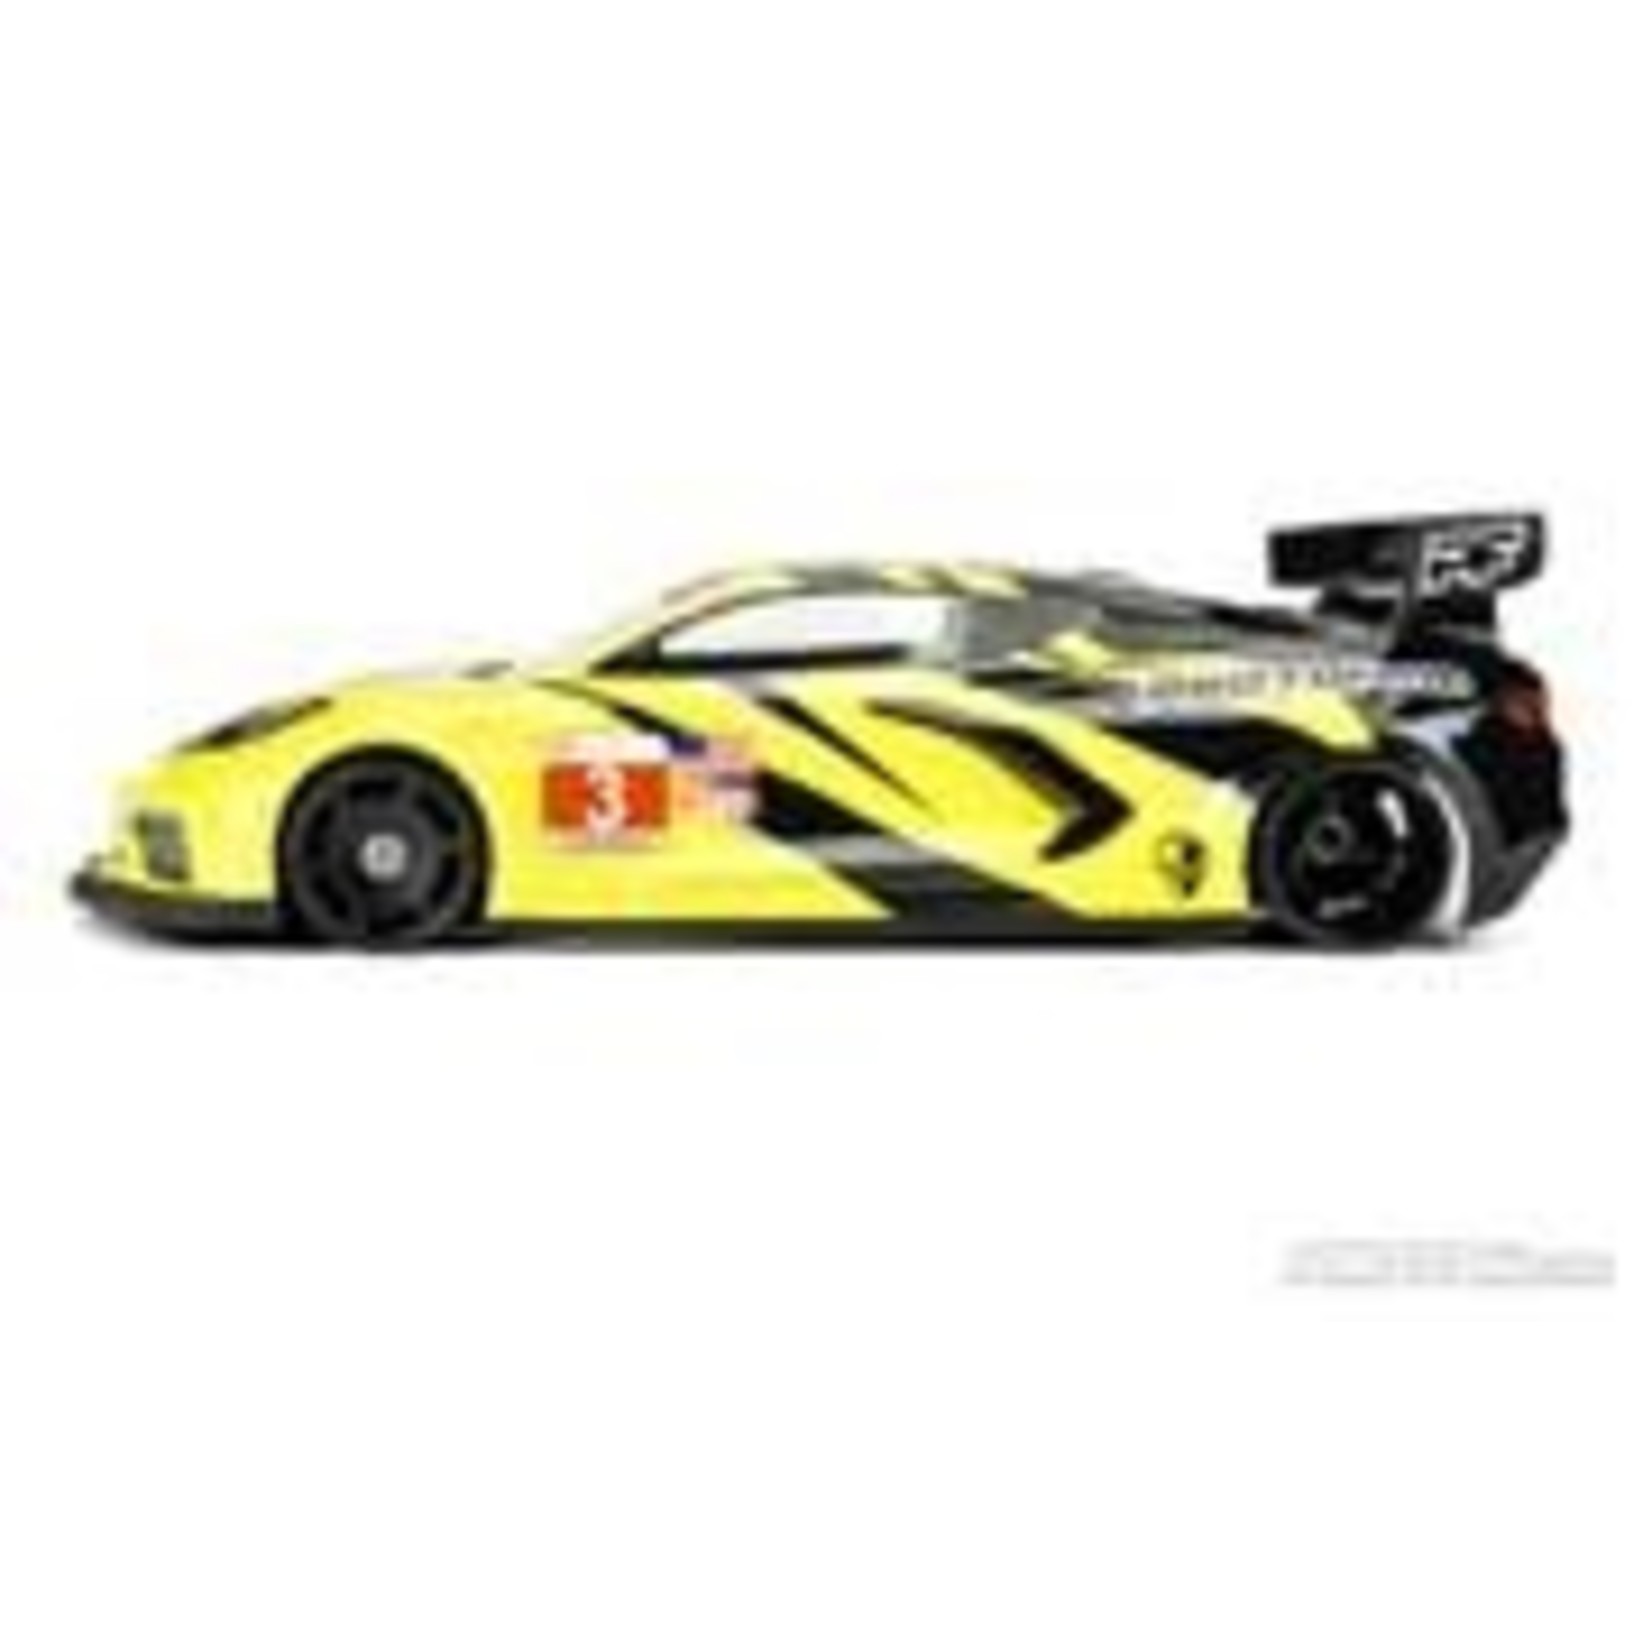 PROTOform item_description Chevrolet Corvette C8 Clear Body for GT12  From the moment rumors surfaced that Chevy was reinventing the legendary Corvette into a mid-engine supercar all of us at PROTOform were waiting with bated breath to see what our future GT raci